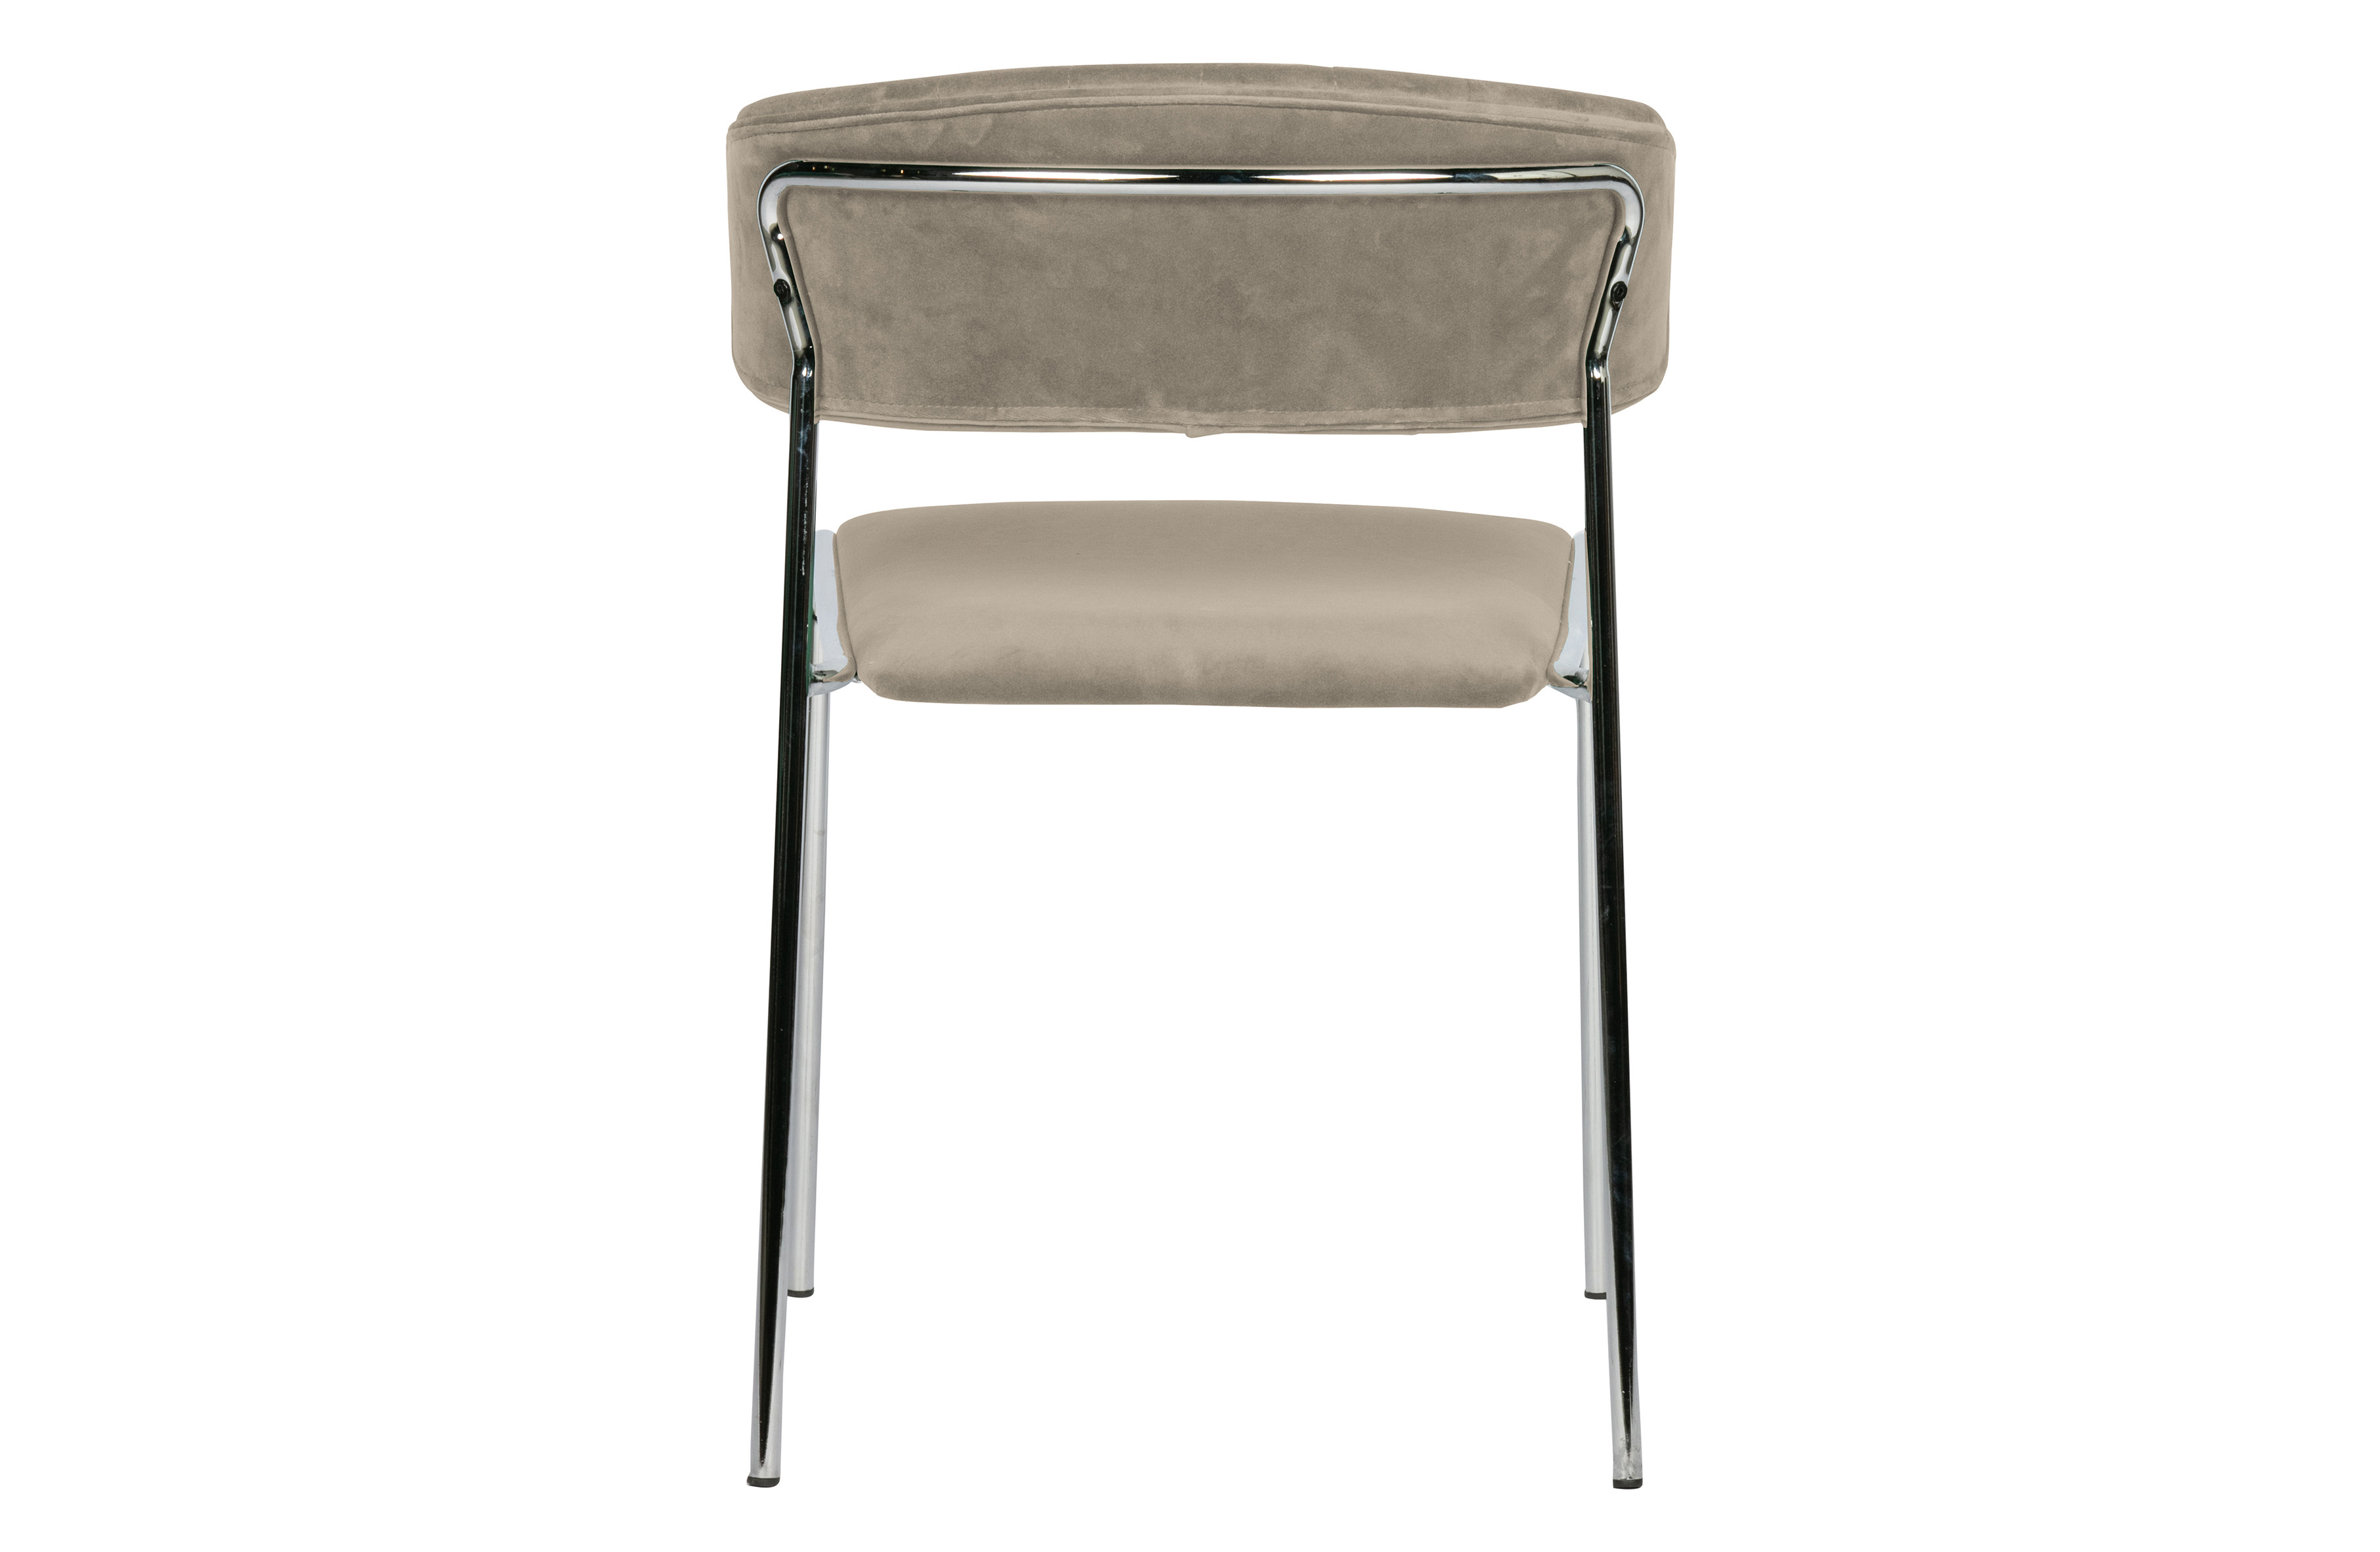 Rent a Dining chair Twitch velvet pale? Rent at KeyPro furniture rental!